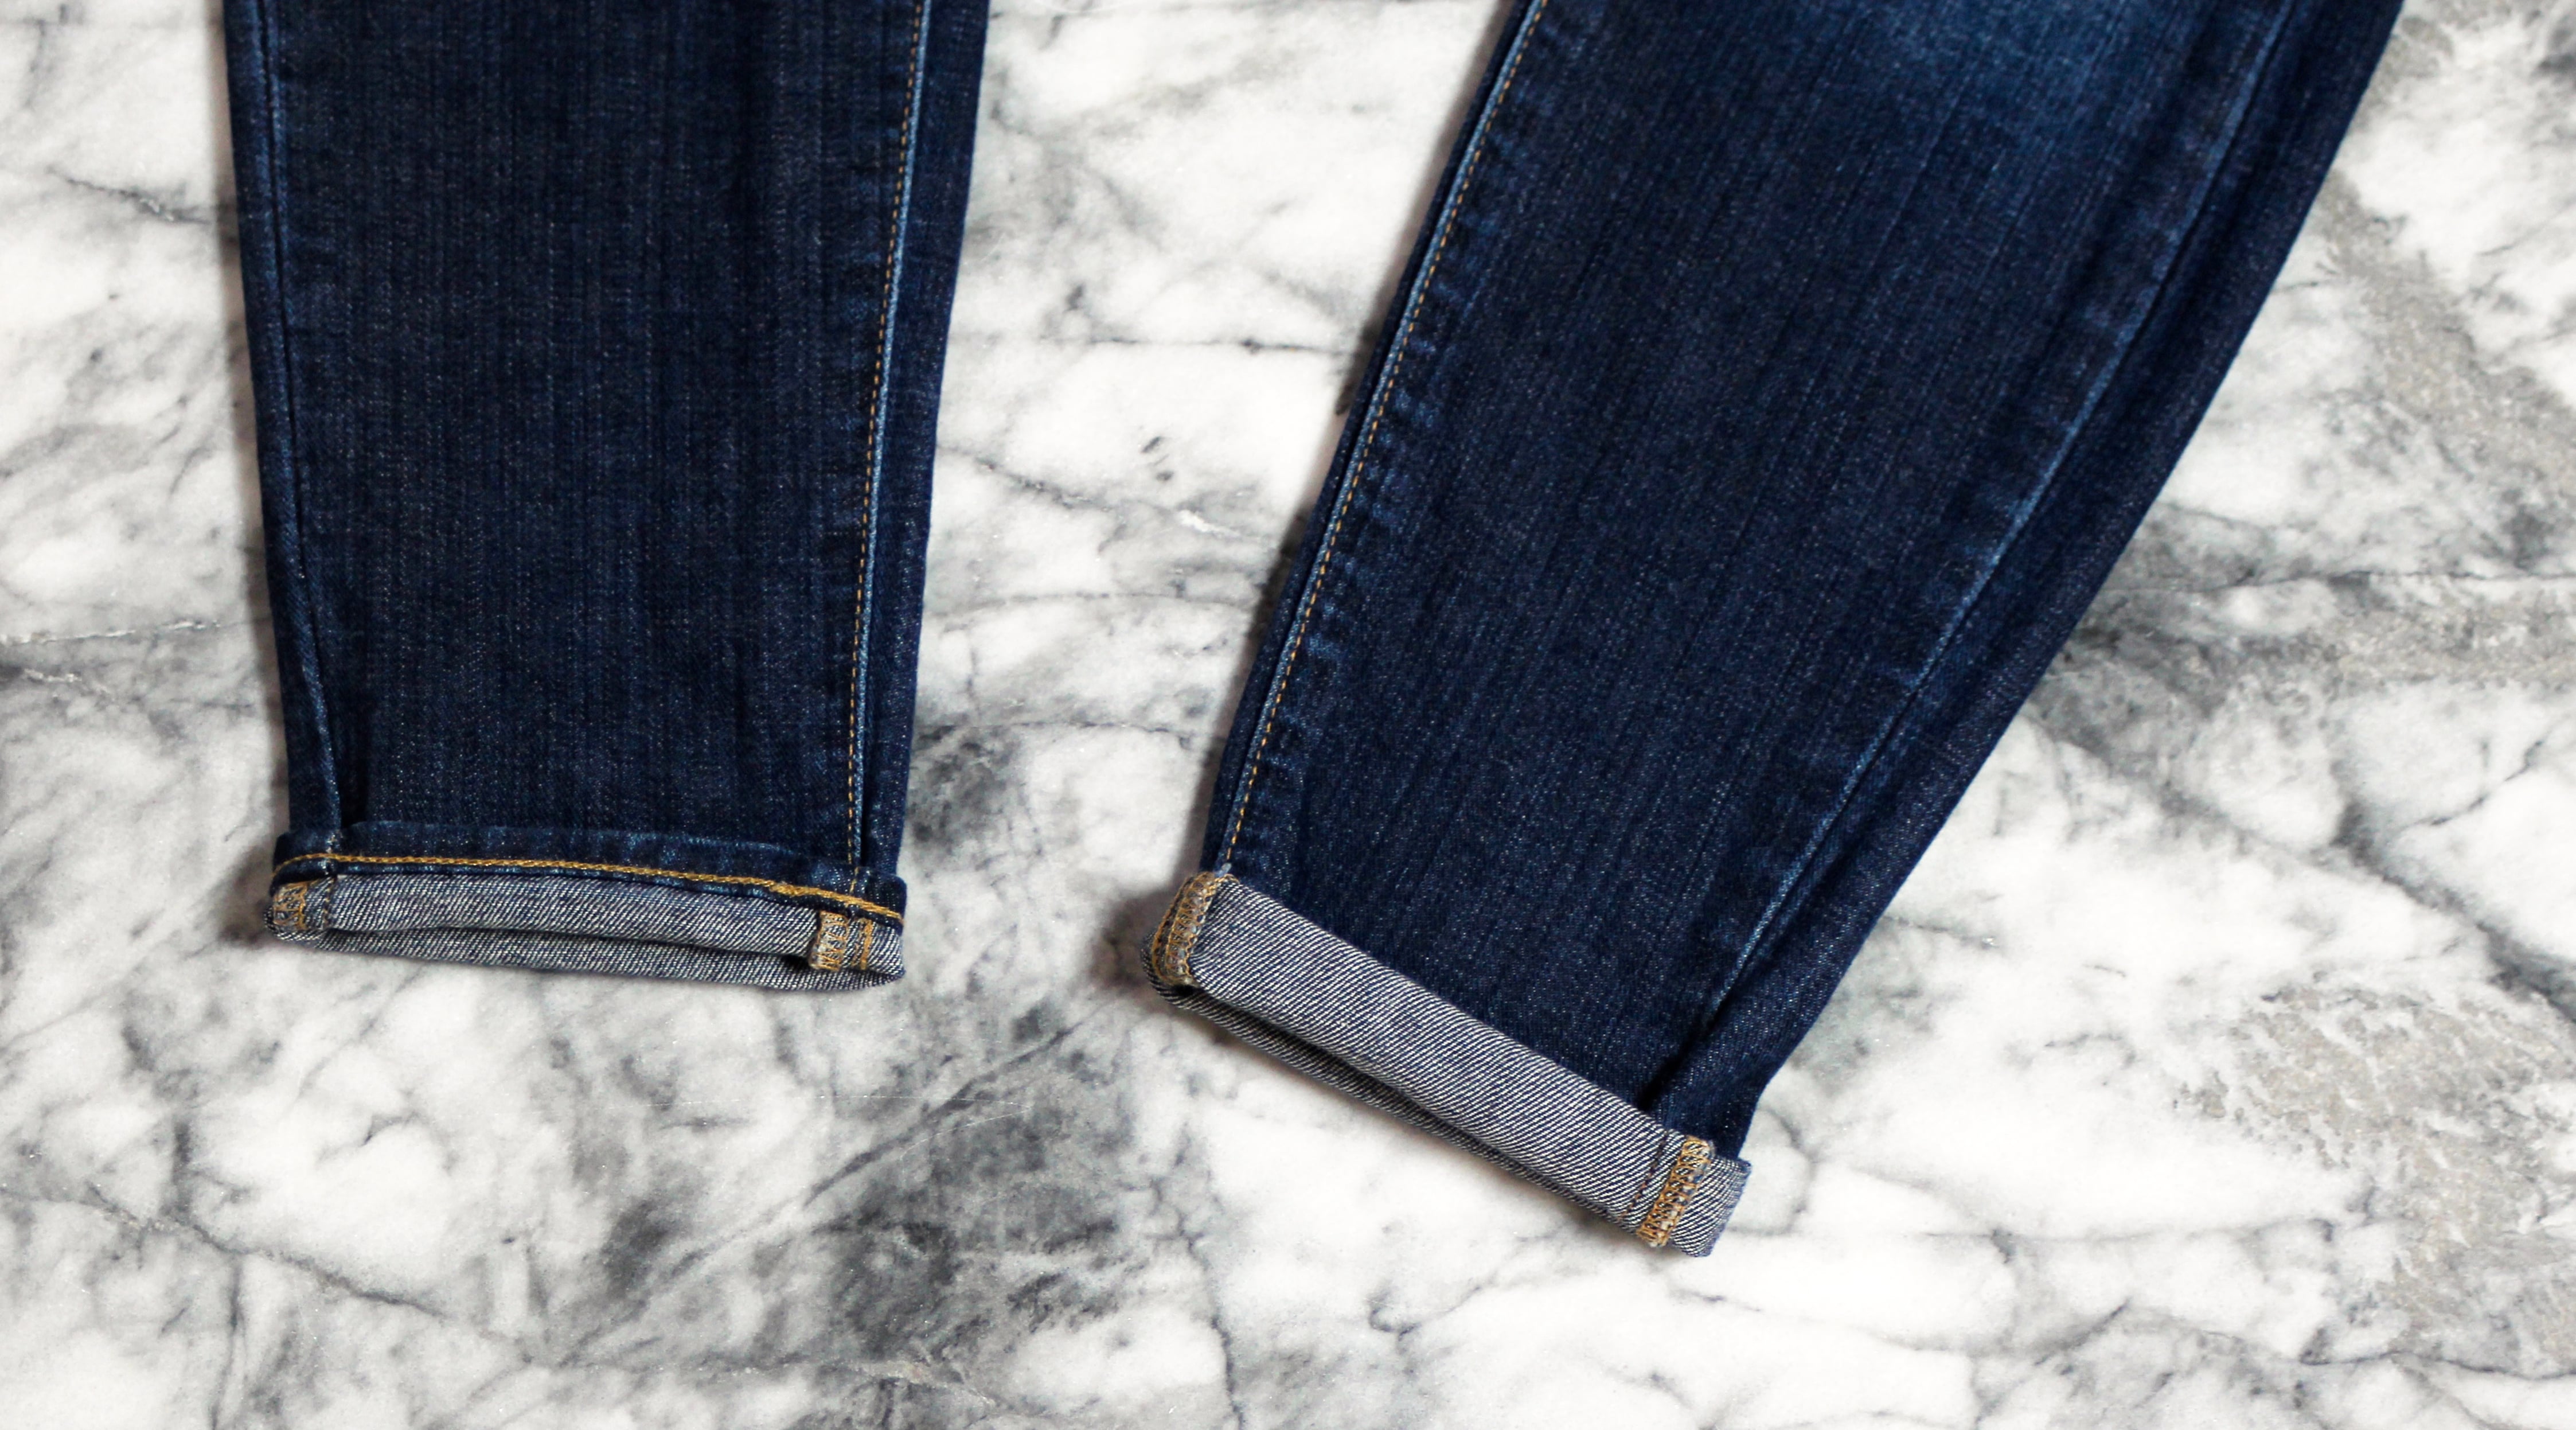 How to cuff jeans